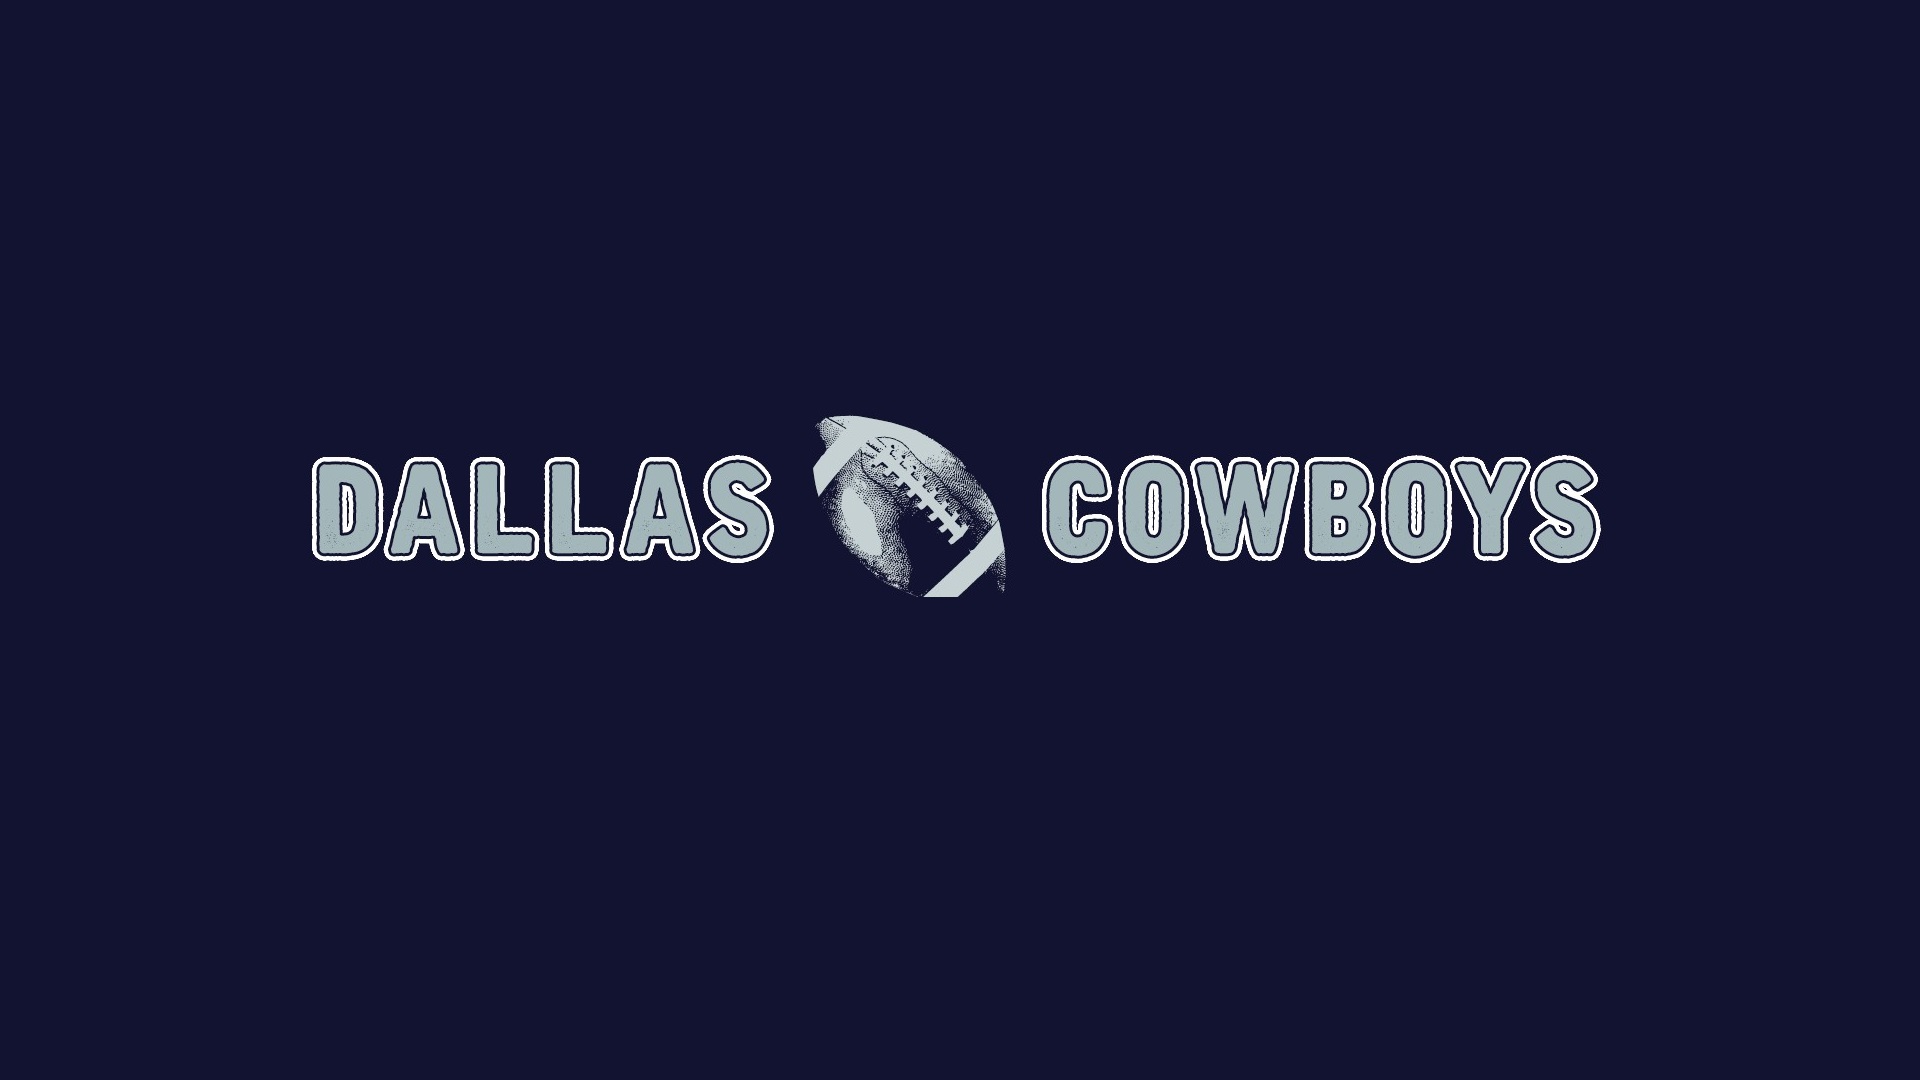 Dallas Cowboys NFL Wallpaper For Mac With high-resolution 1920X1080 pixel. You can use this wallpaper for your Mac or Windows Desktop Background, iPhone, Android or Tablet and another Smartphone device